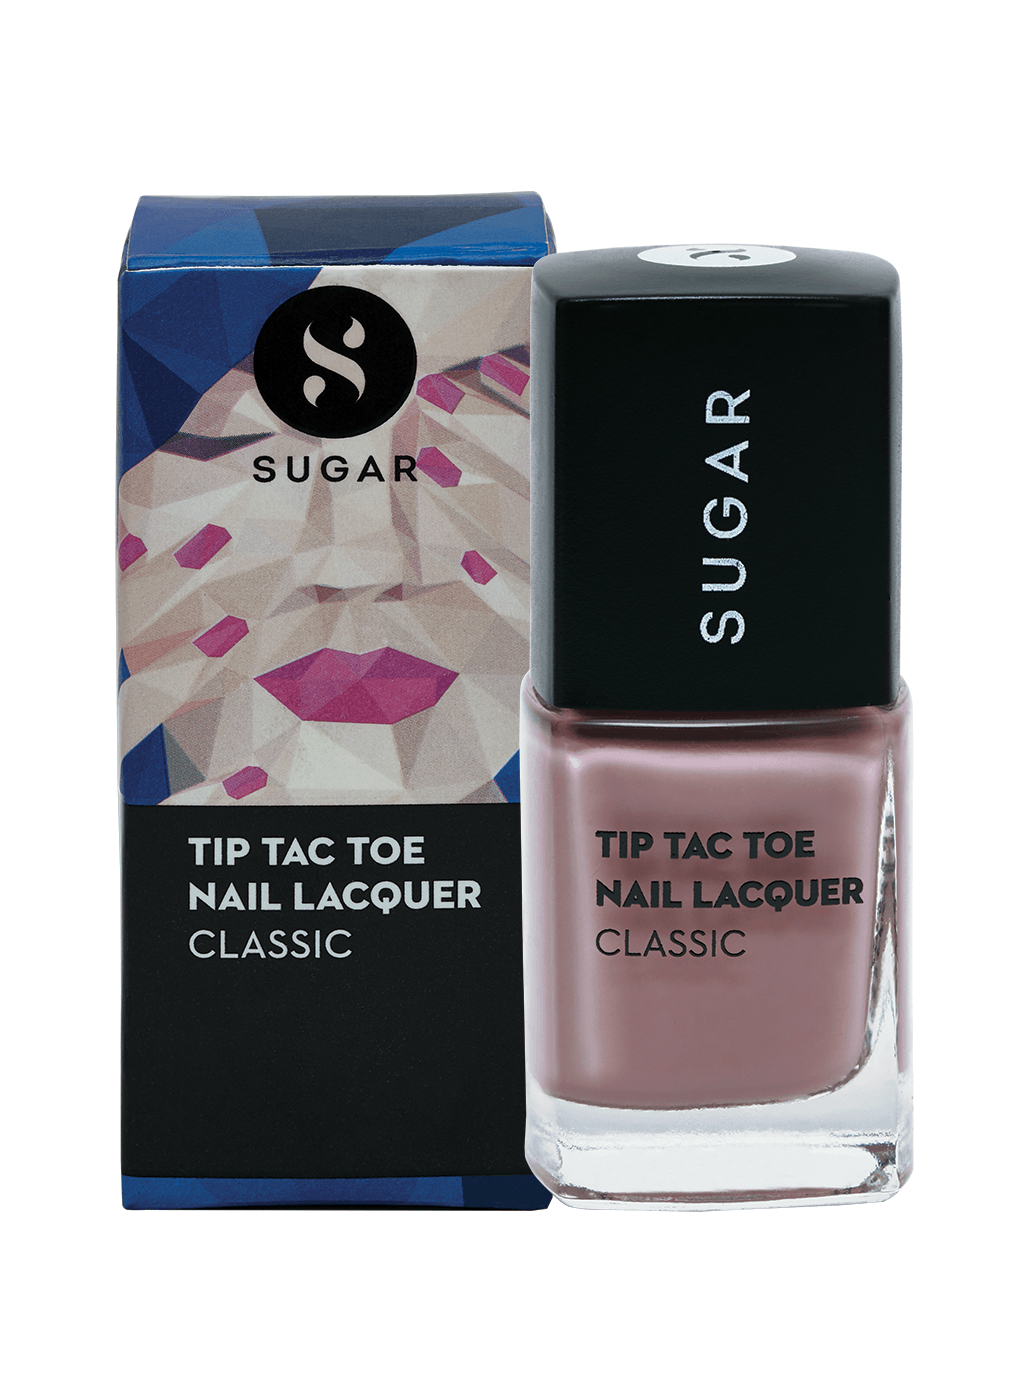 Tip Tac Toe Nail Lacquer - 017 Lilac Lustre (Pink Lilac)